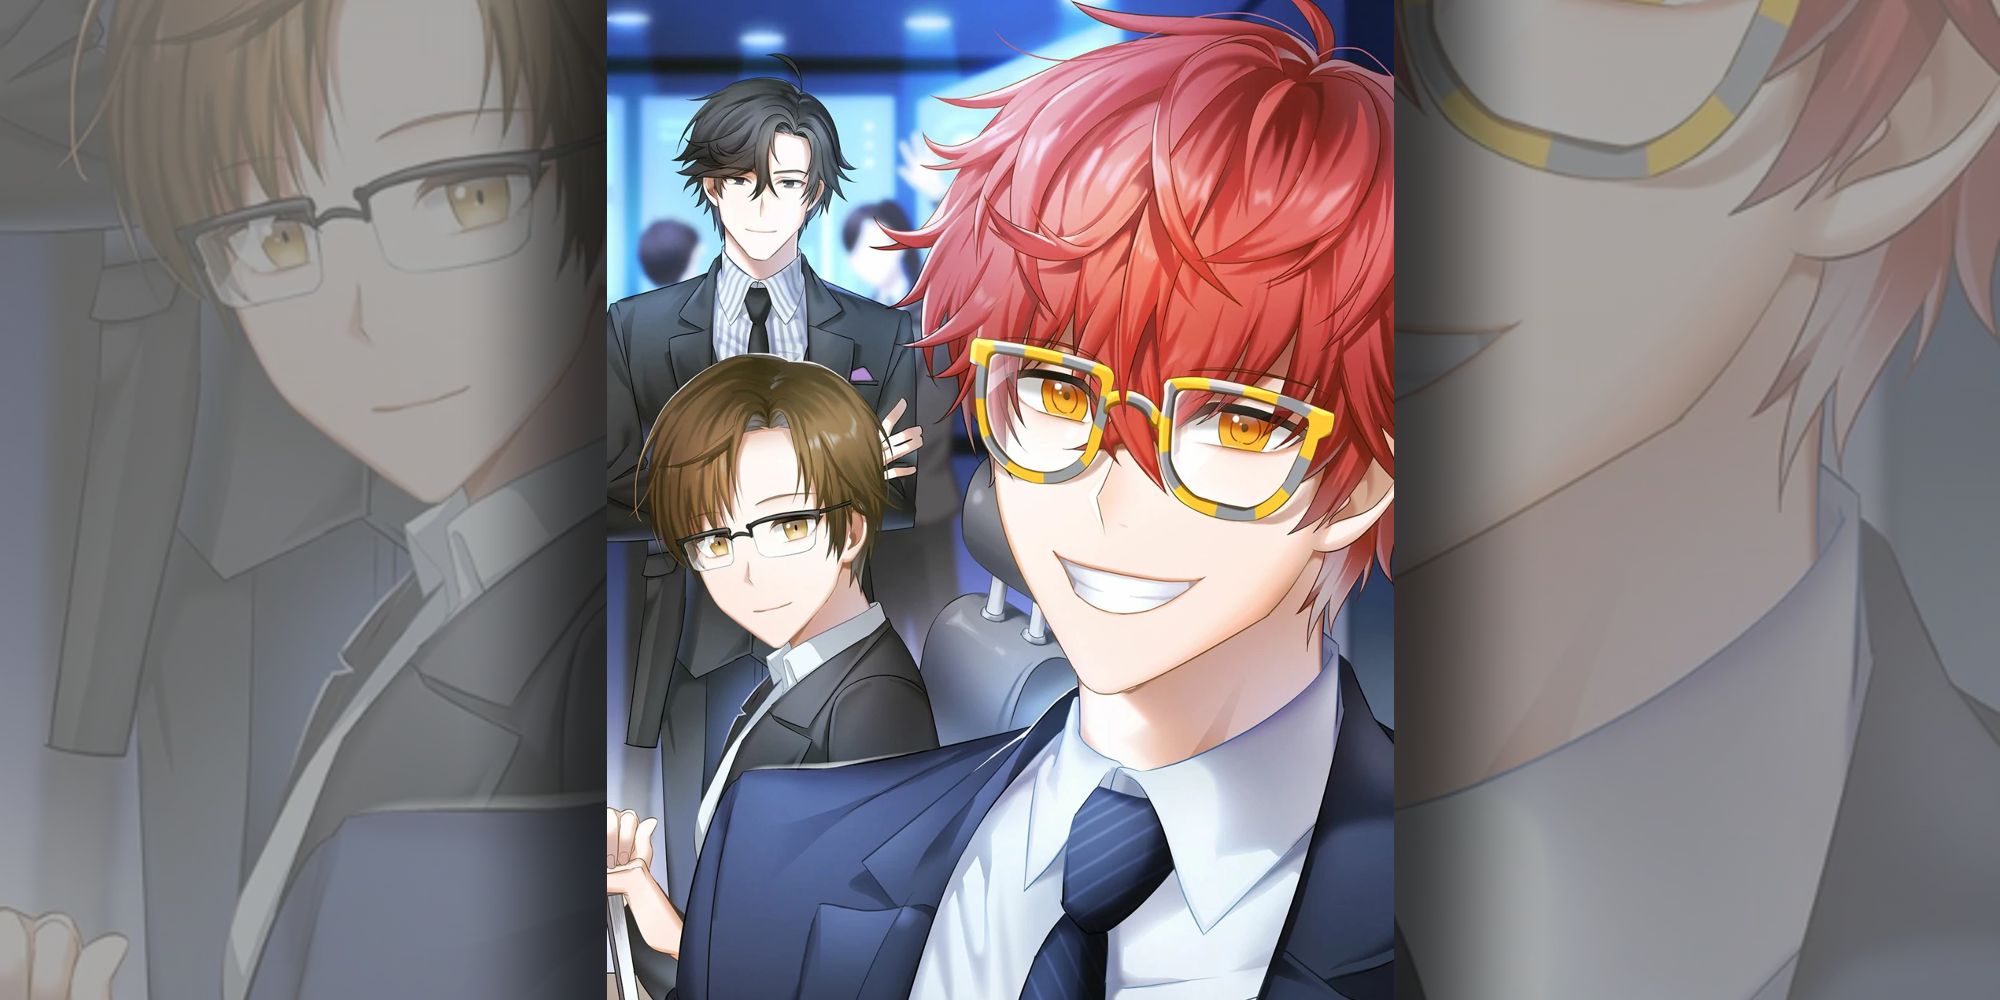 707 at party with other characters